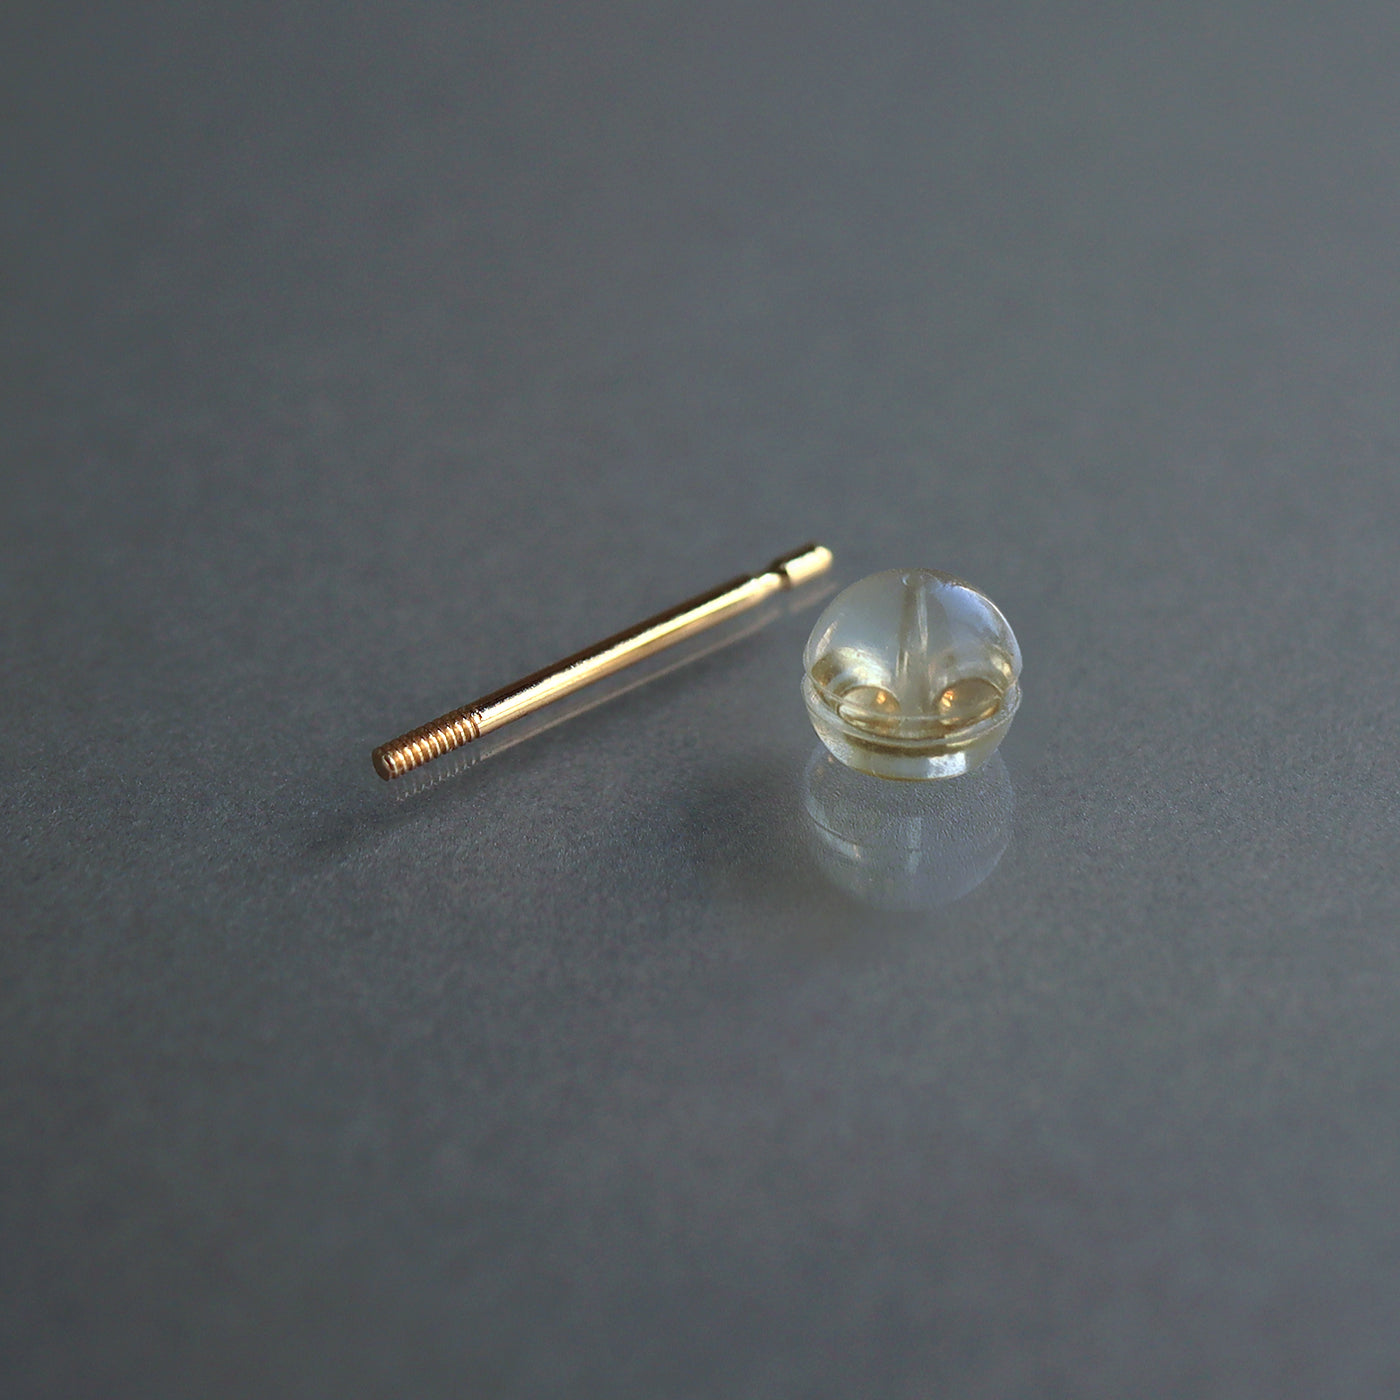 【BASE PARTS】18K YG Stud Earring with Silicon Backing